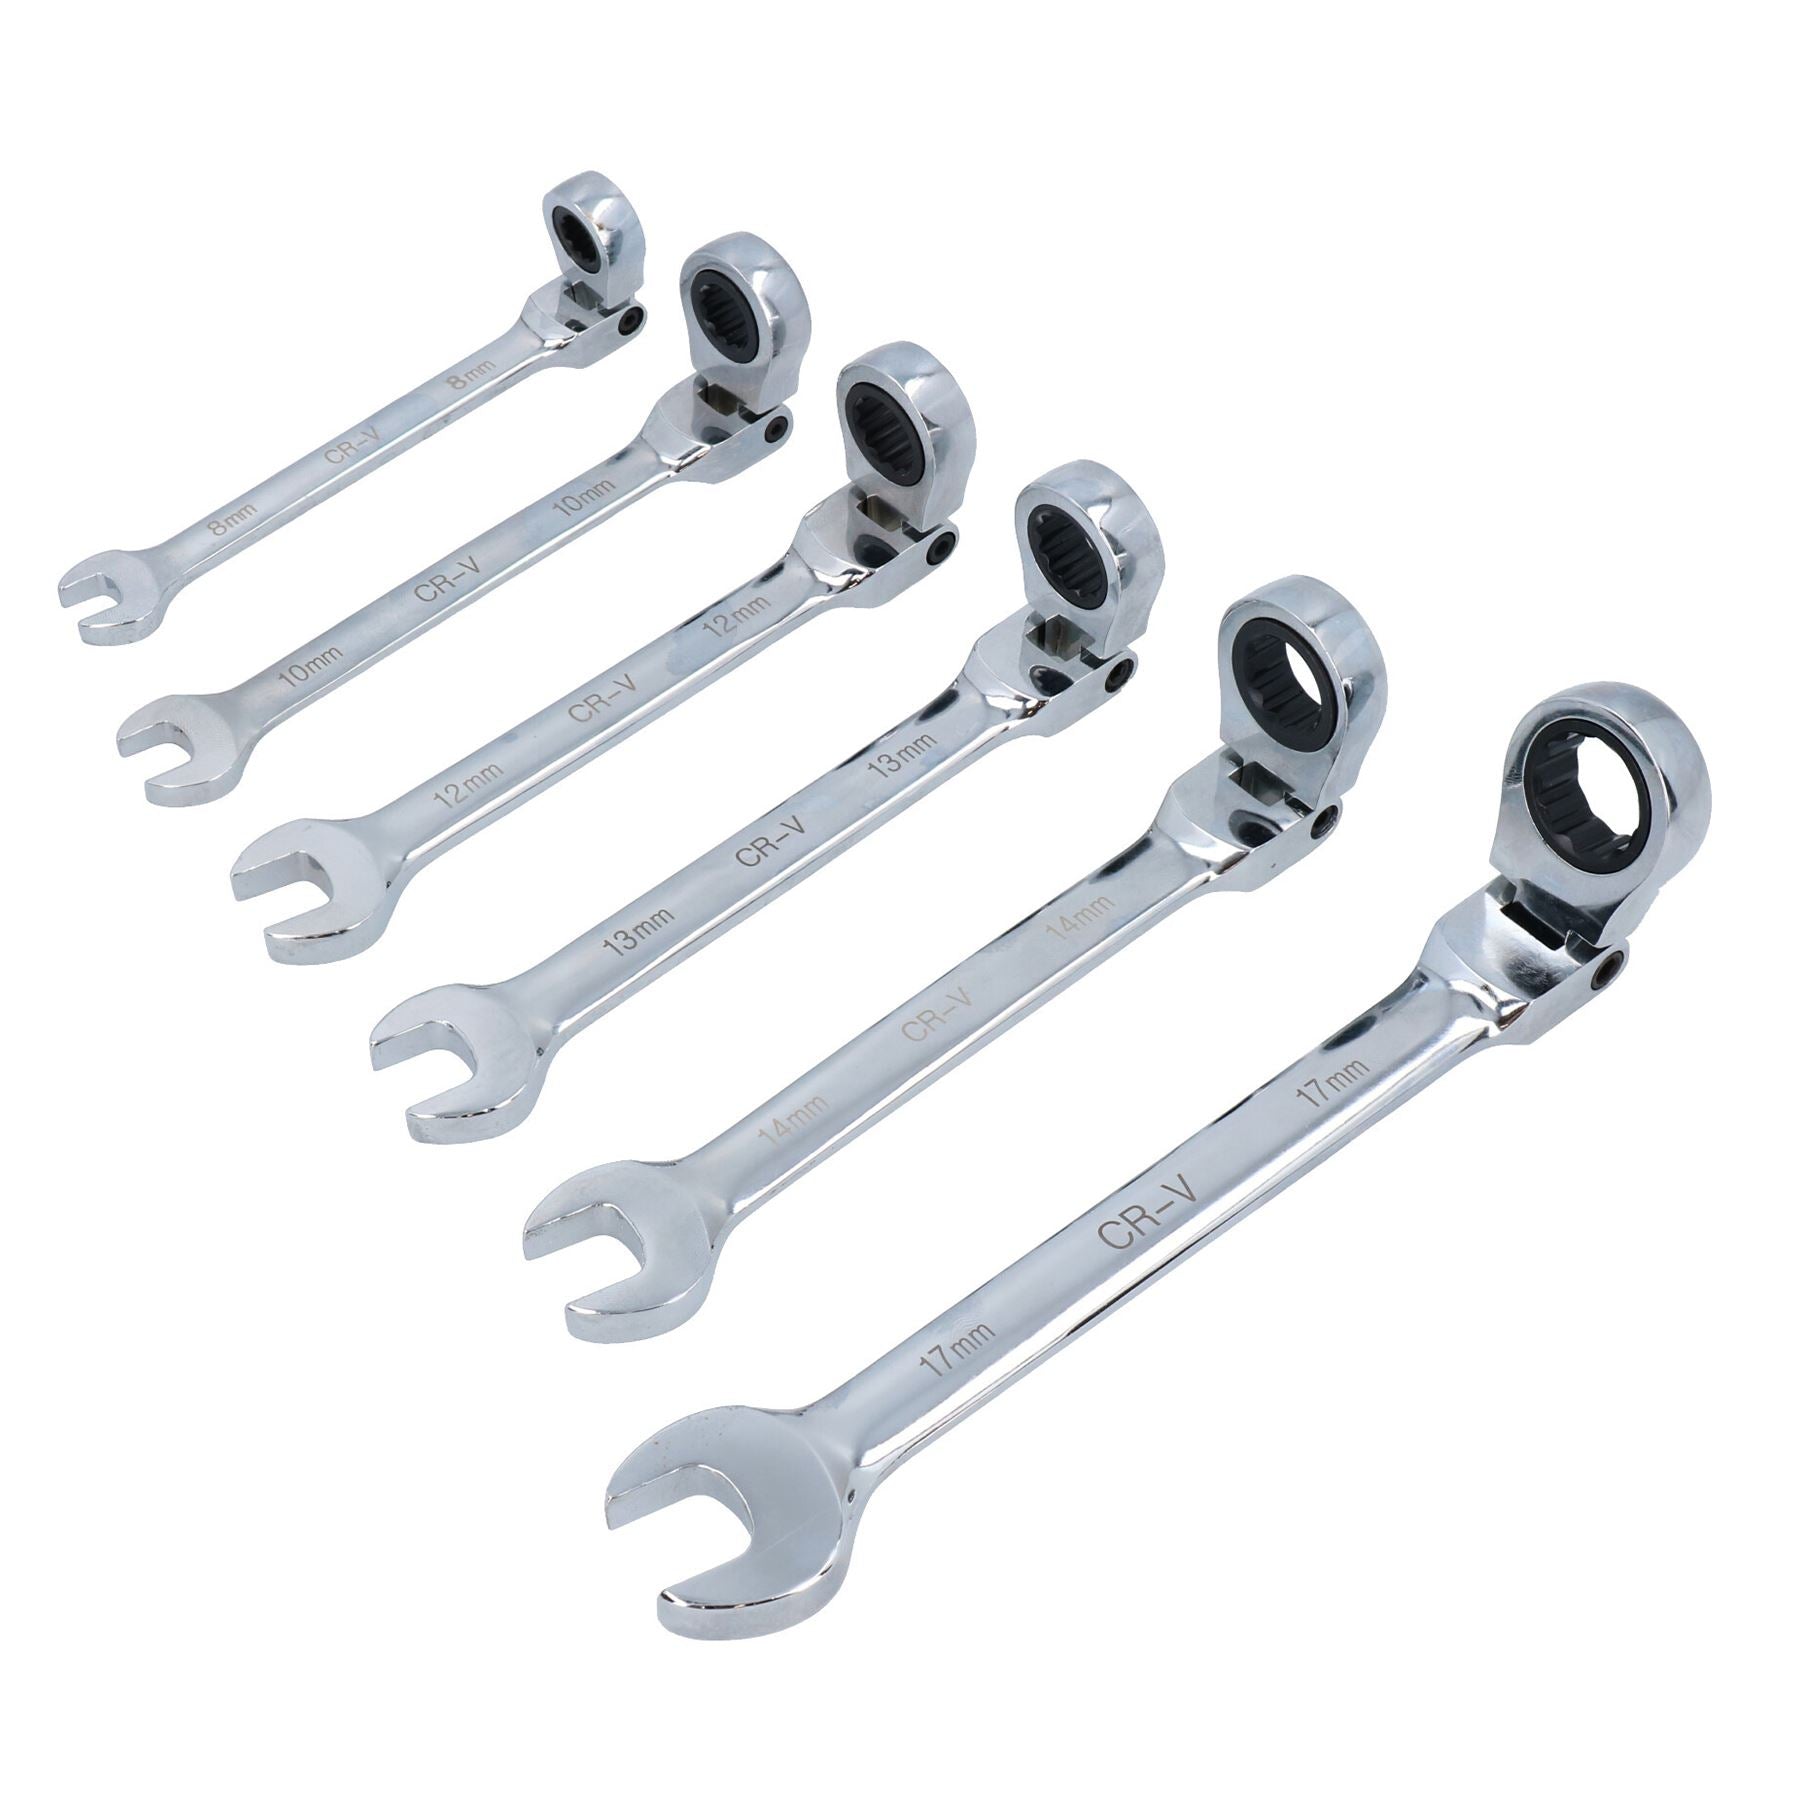 6pc Metric Flexible Ratchet Combination Spanner Wrench Set 8mm - 19mm